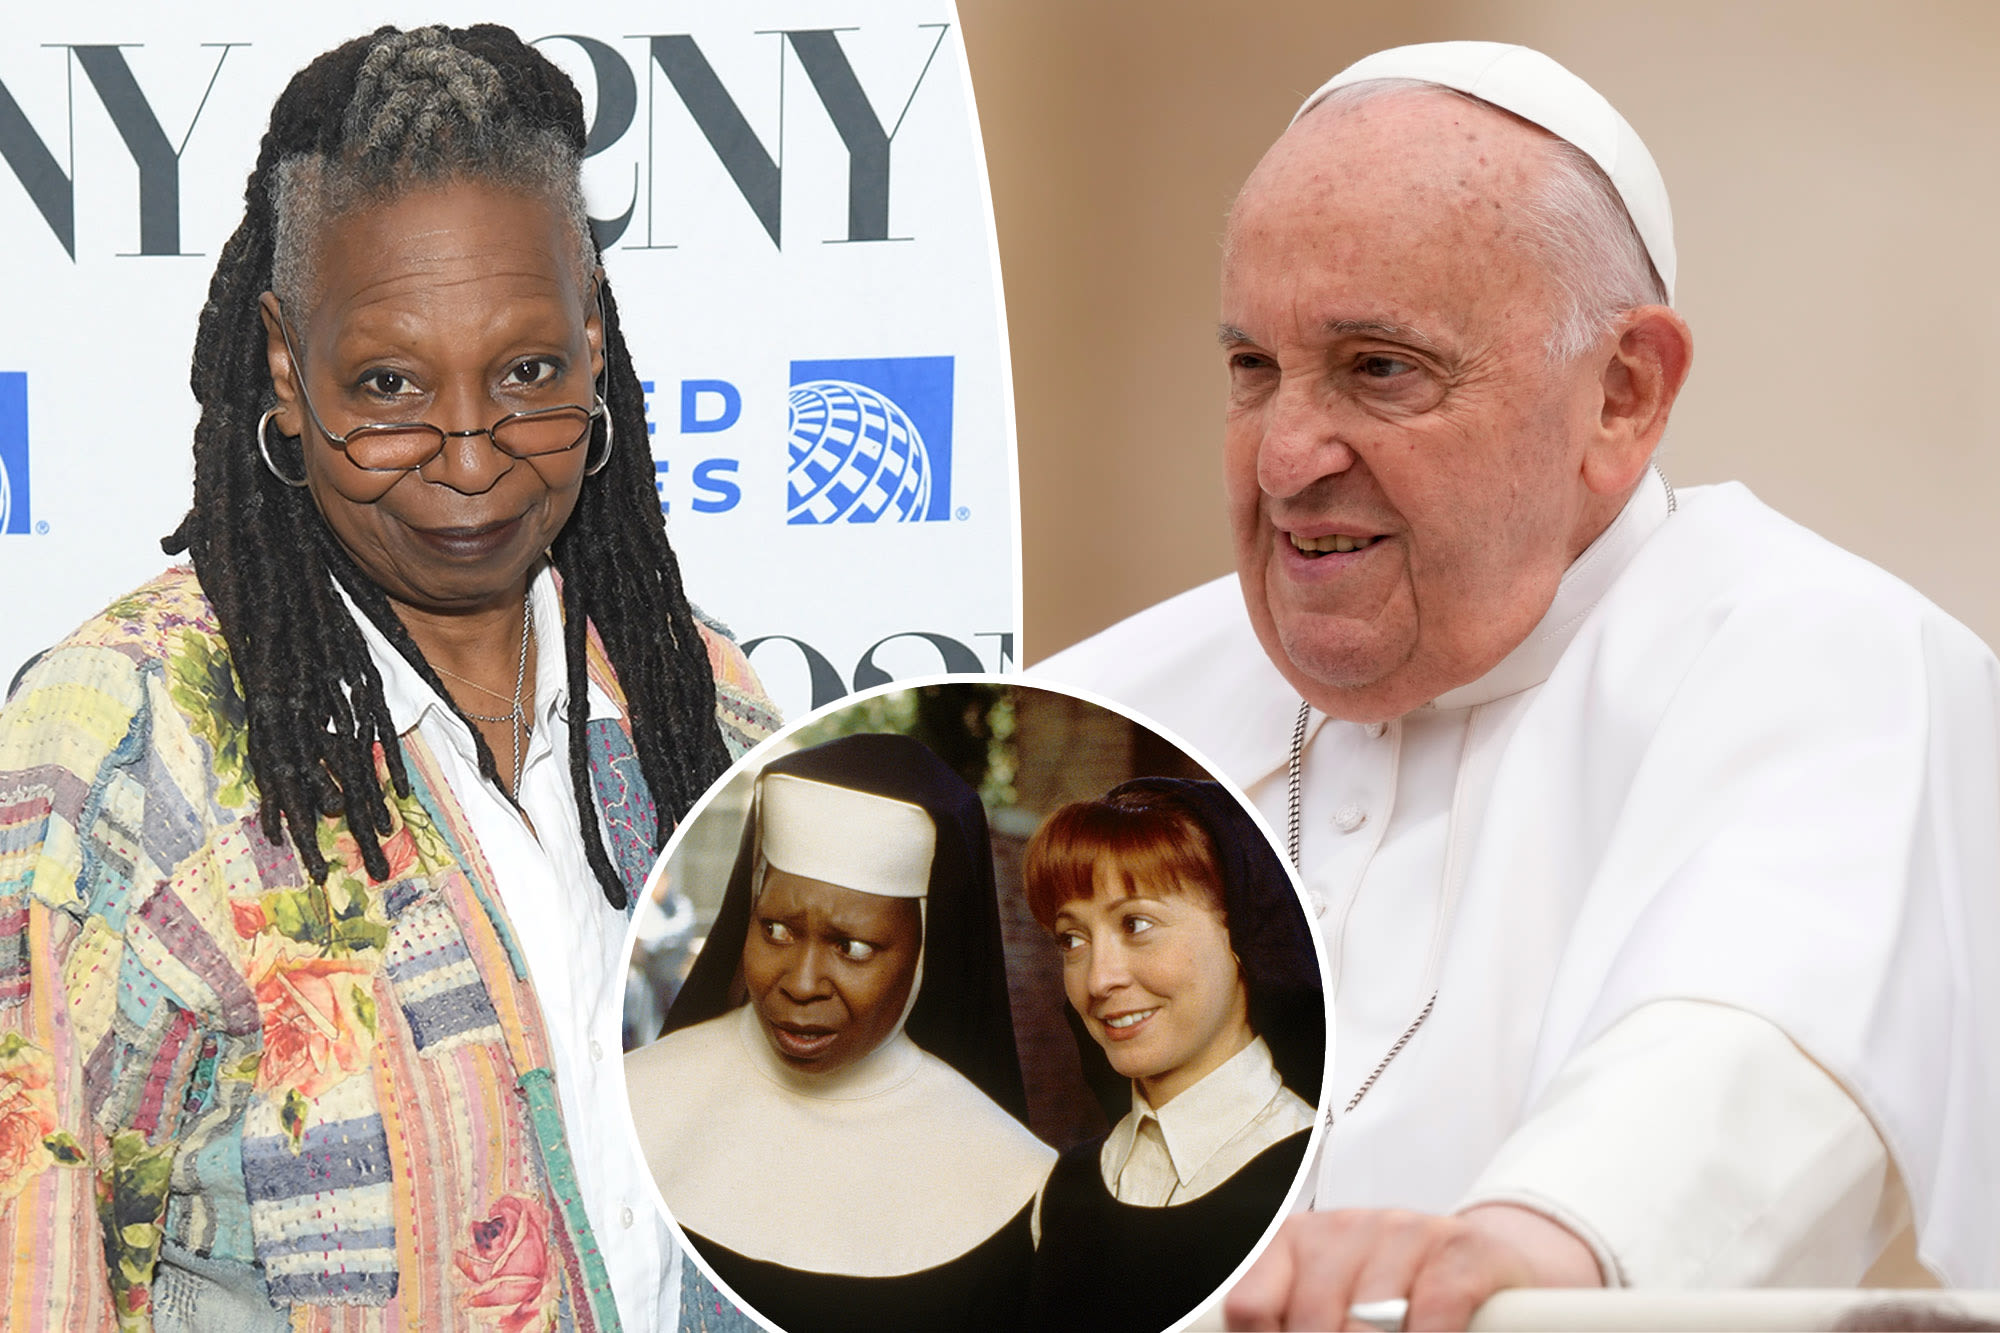 Whoopi Goldberg ‘offered’ Pope Francis a role in ‘Sister Act 3’: He’s ‘a fan’